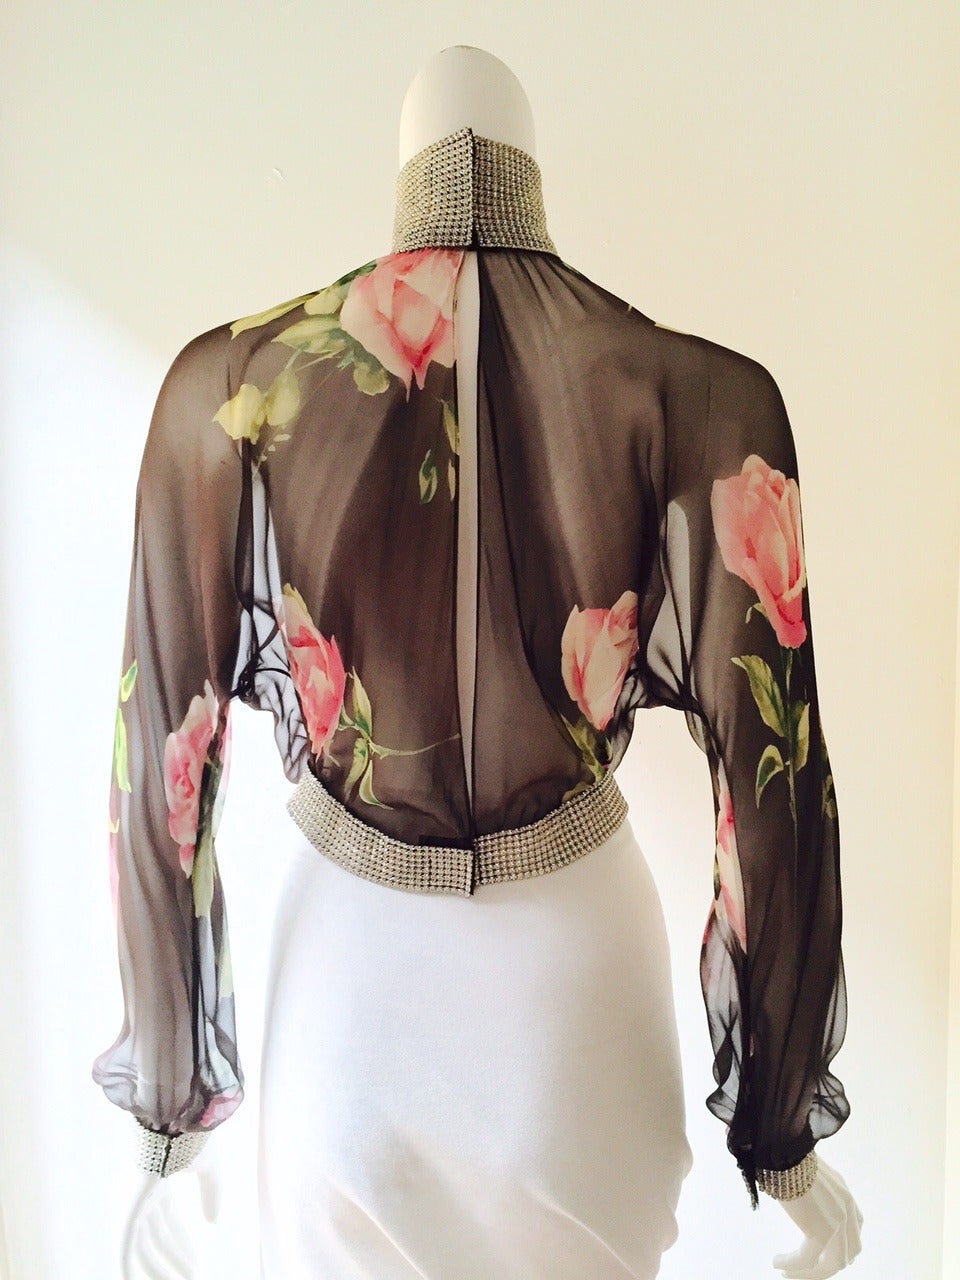 Dolce & Gabbana Silk Chiffon Blouse With Rhinestone Collar and Cuffs In Excellent Condition For Sale In Palm Beach, FL